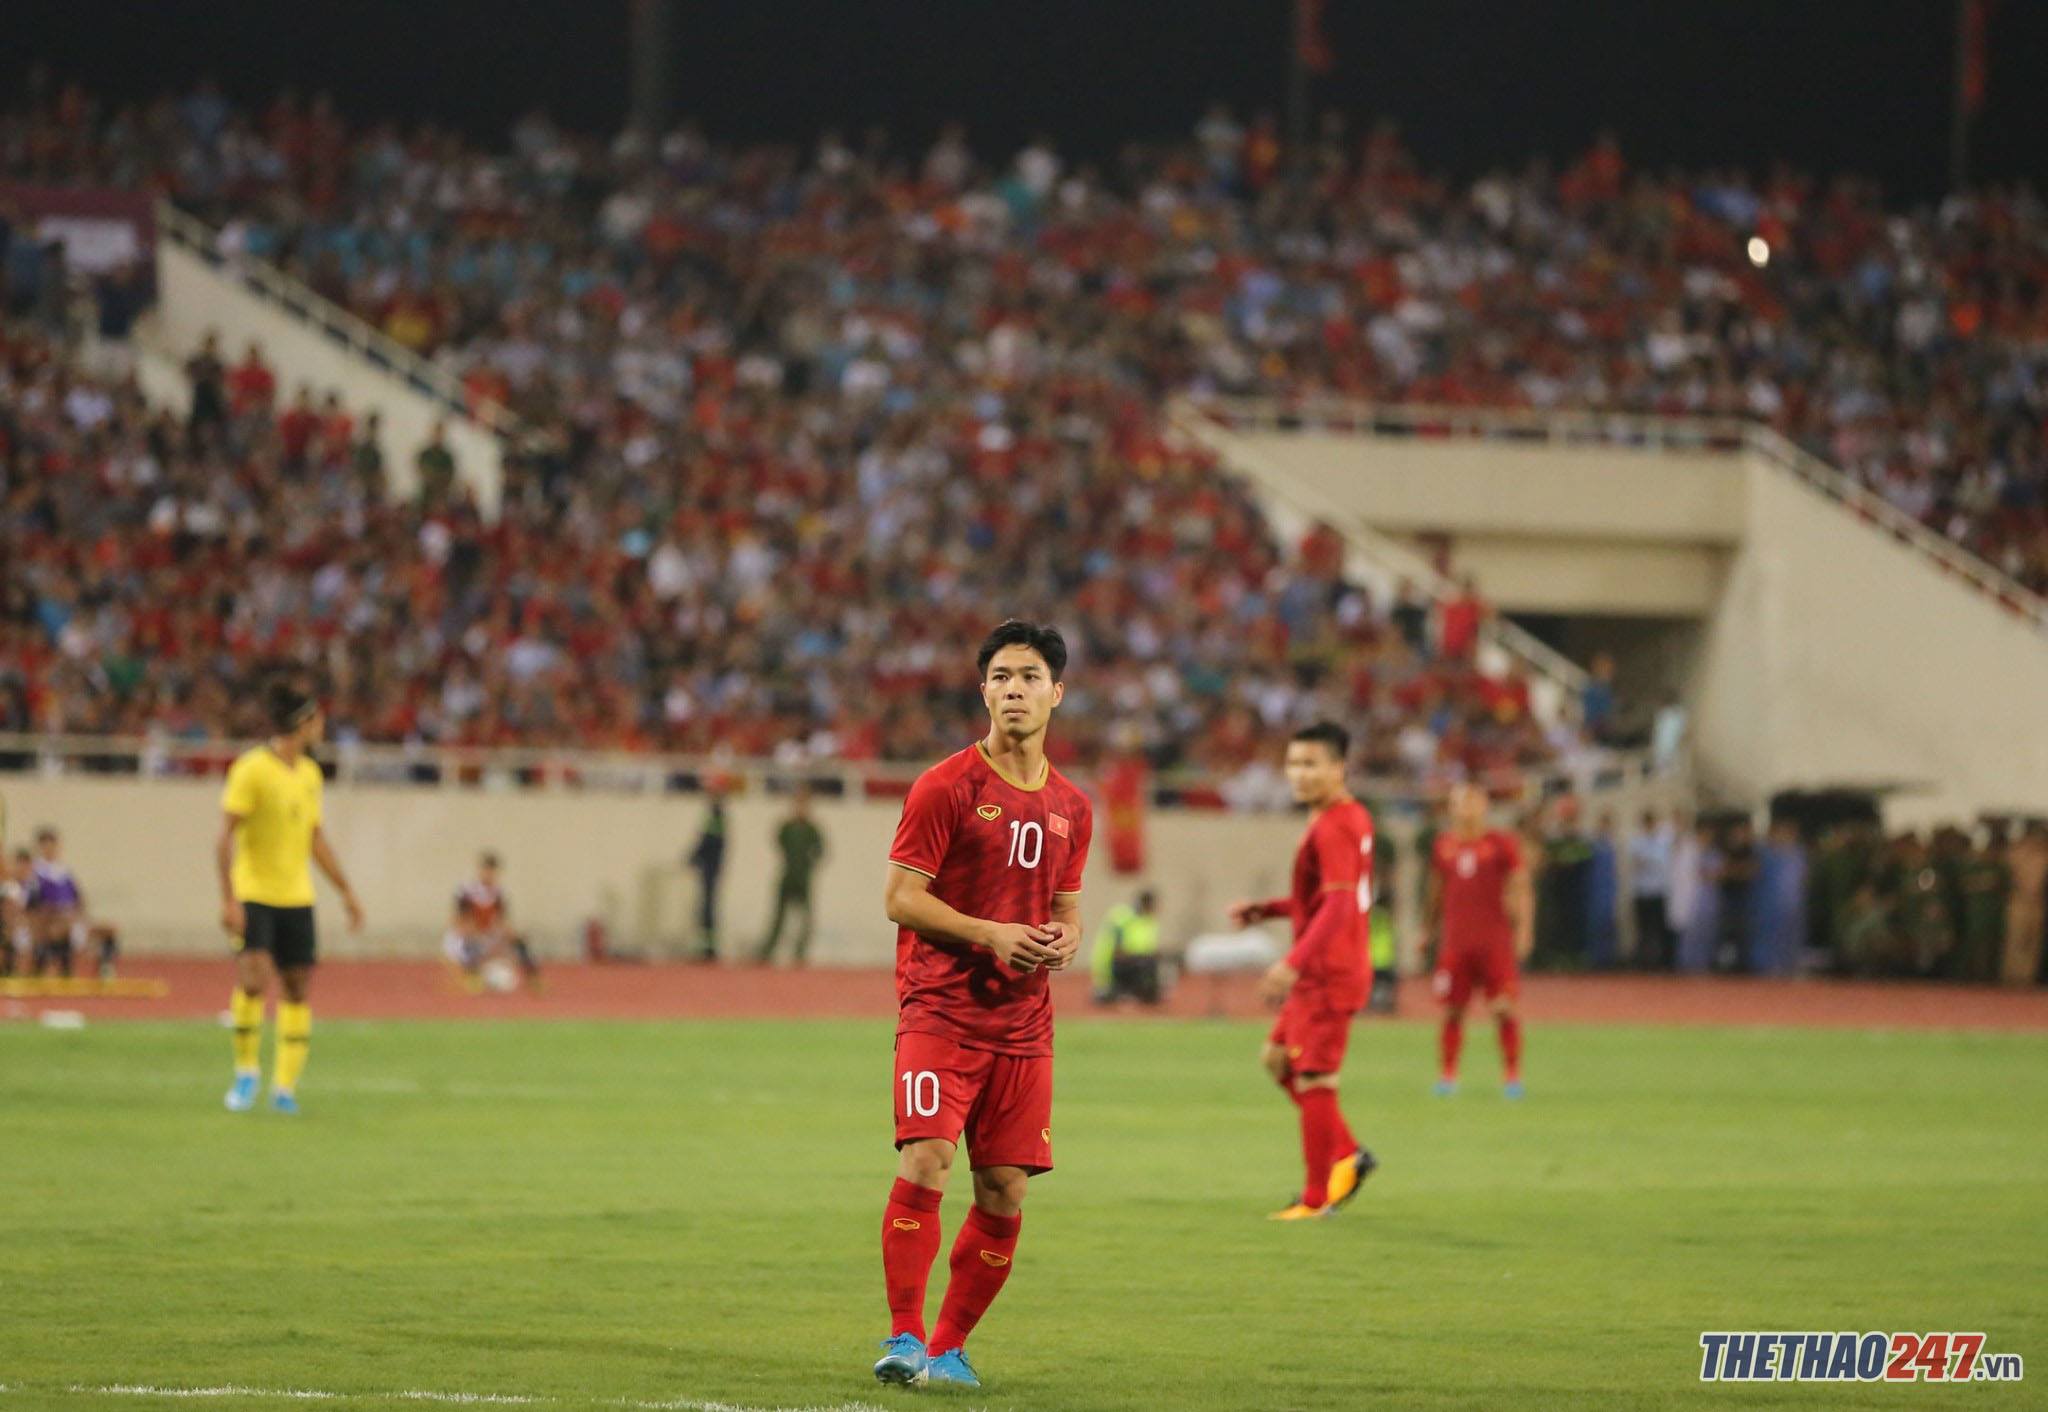 Cong Phuong is confident in the upcoming battle against Indonesia.